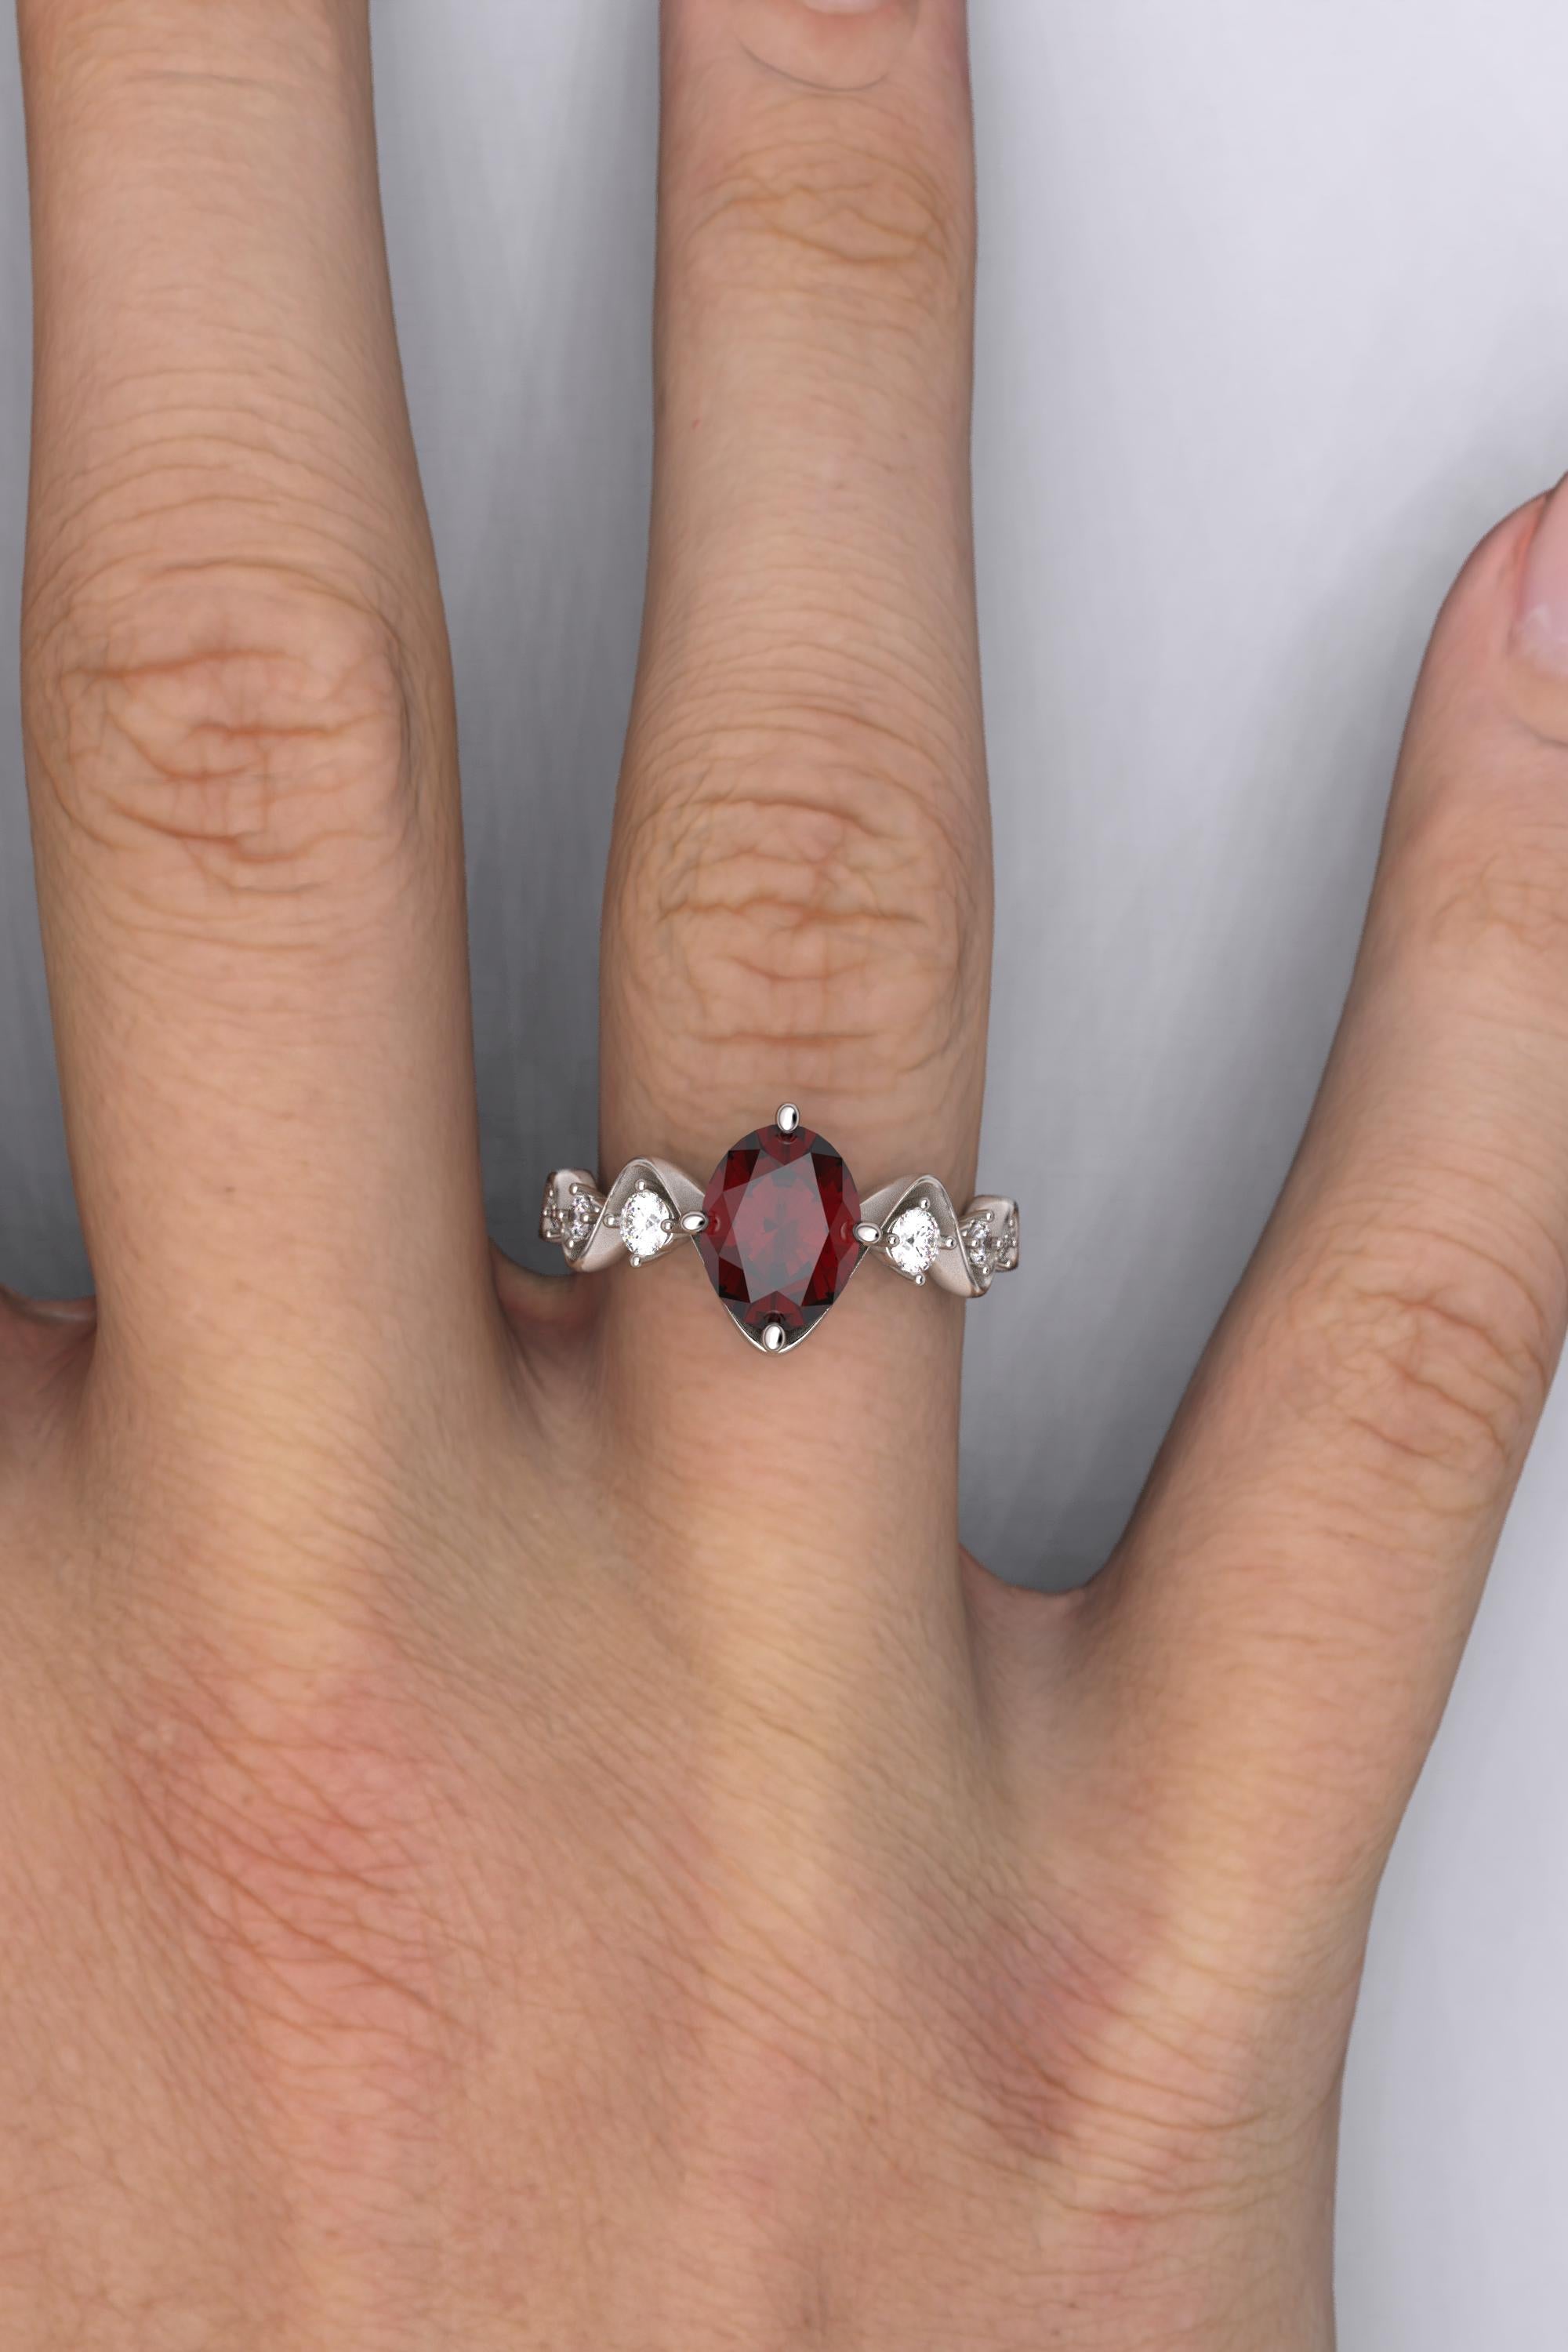 For Sale:  Garnet and Diamonds Engagement Ring Made in Italy by Oltremare Gioielli 18k Gold 7